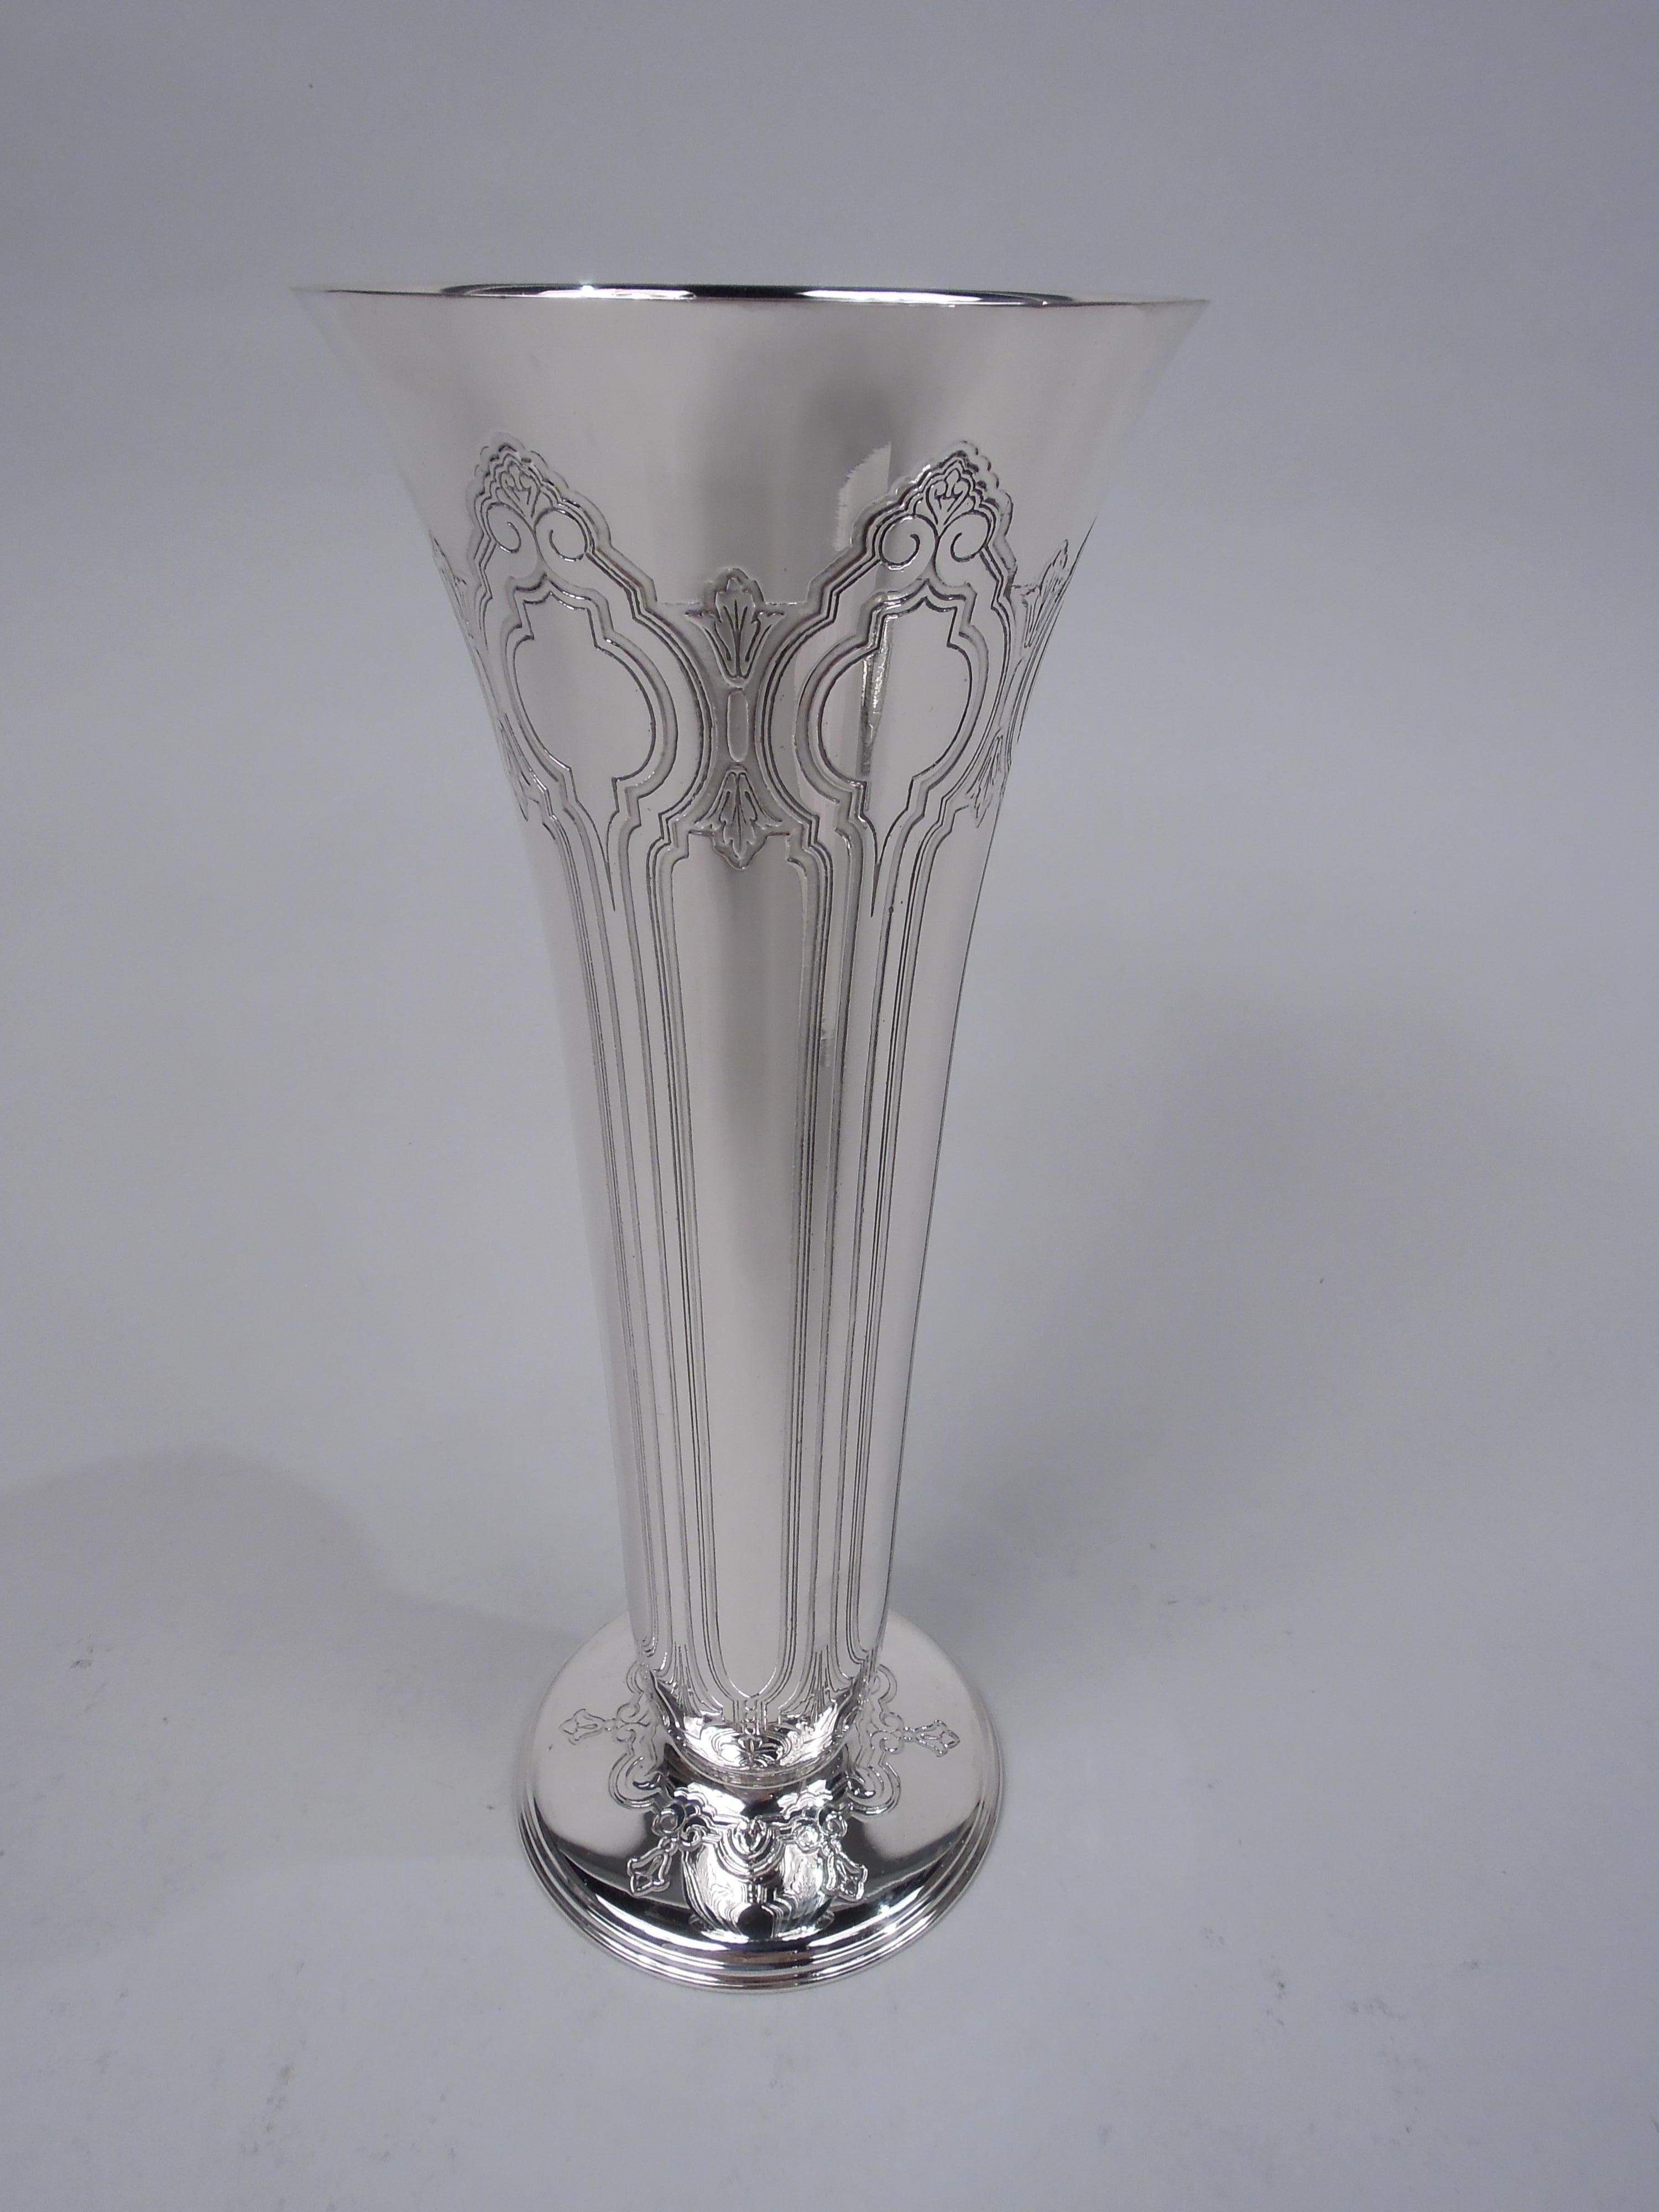 Edwardian Classical sterling silver vase. Made by Tiffany & Co. in New York, ca 1912. Tapering sides with flared mouth rim and stepped round foot. Acid-etched vertical ornament with alternating wide and narrow curvilinear frames with stylized leaves